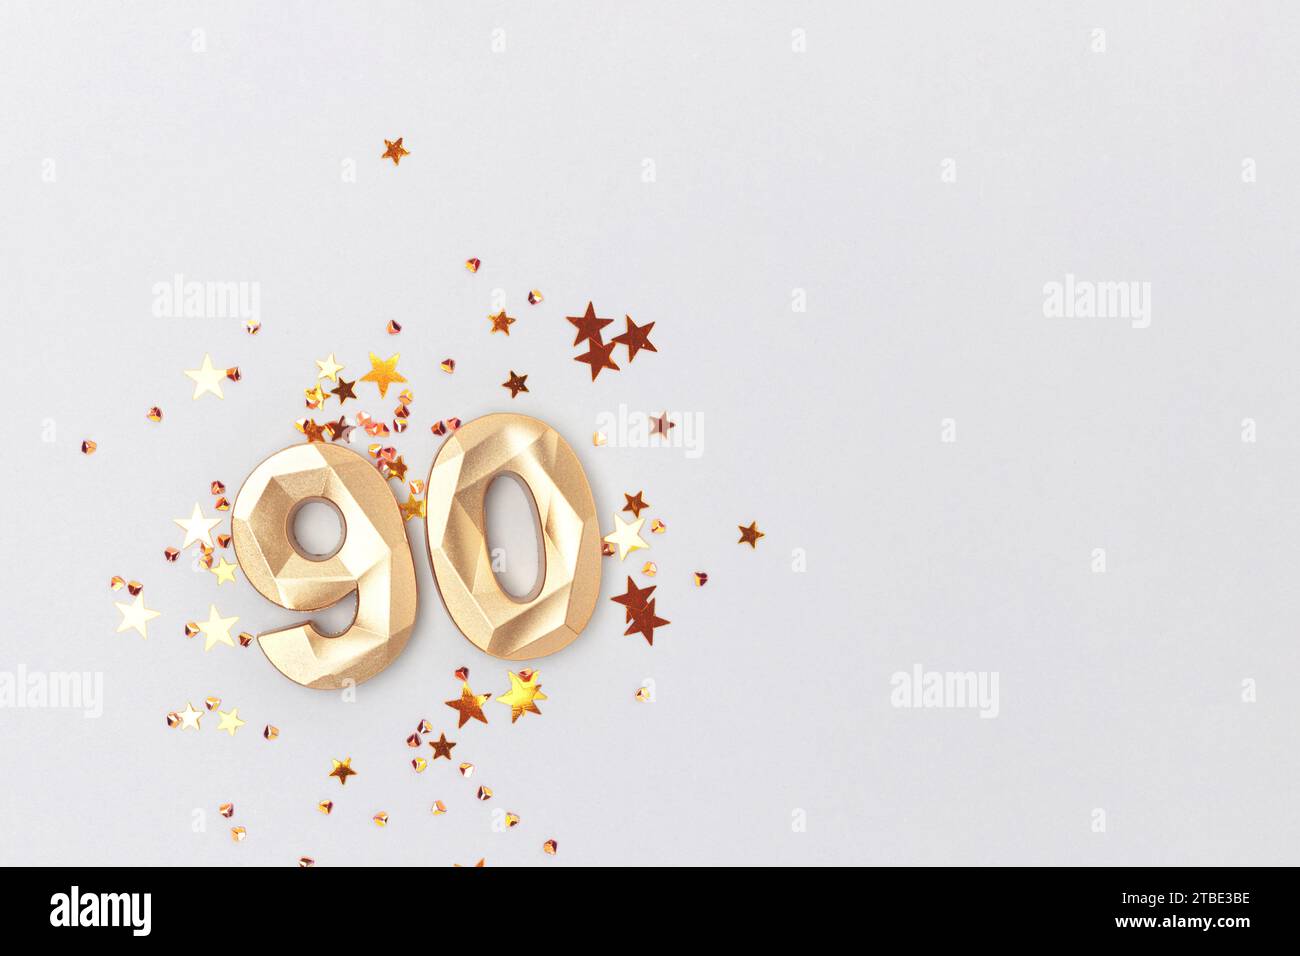 Golden number 90 and glowing stars confetti on a blue background. Festive composition. Stock Photo